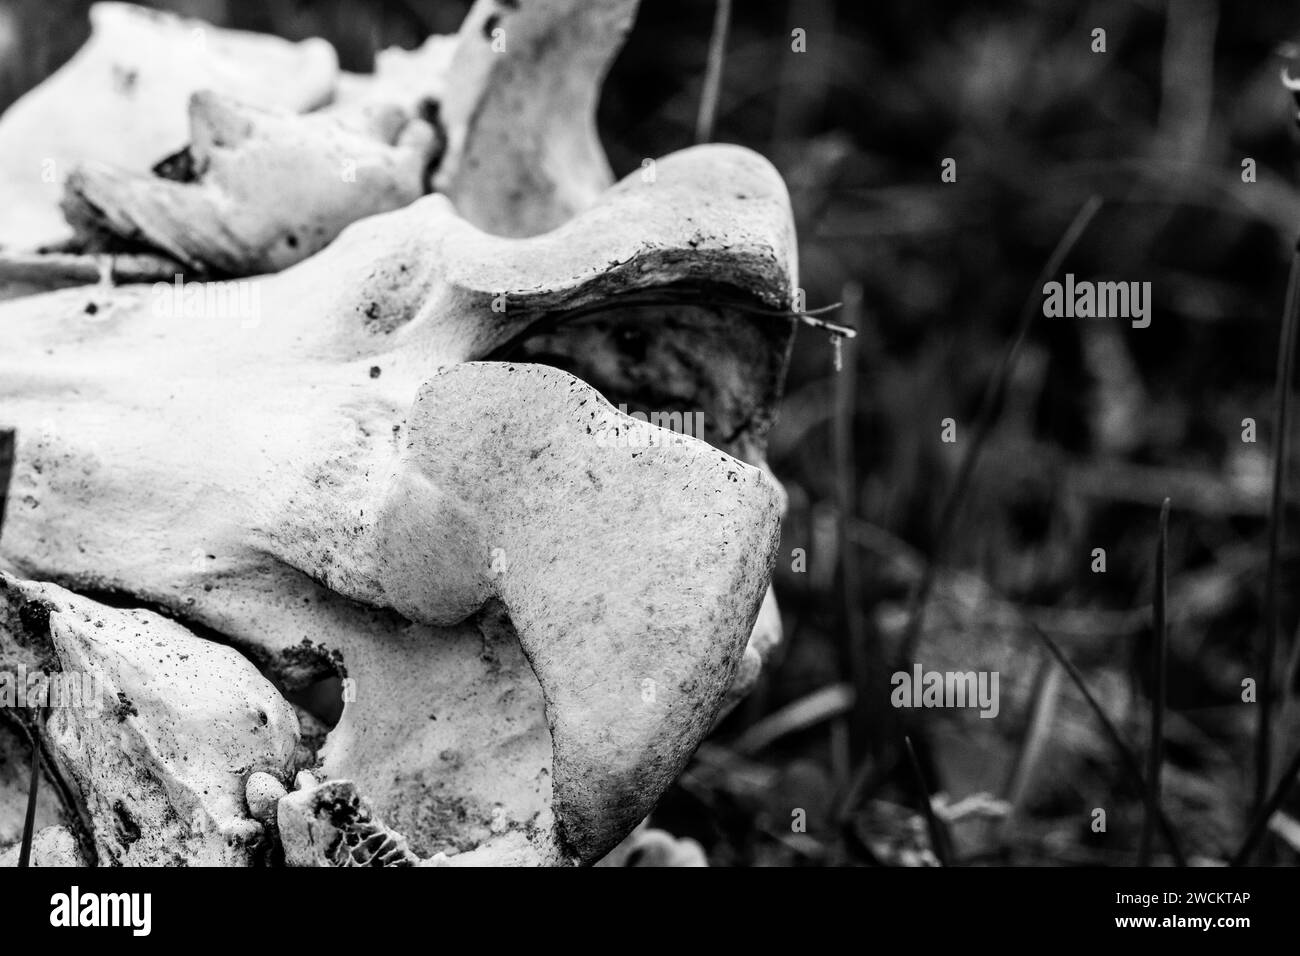 Black and white photo of an old caribou shoulder or hip bone found on the arctic tundra, near Arviat, Nunavut, Canada Stock Photo